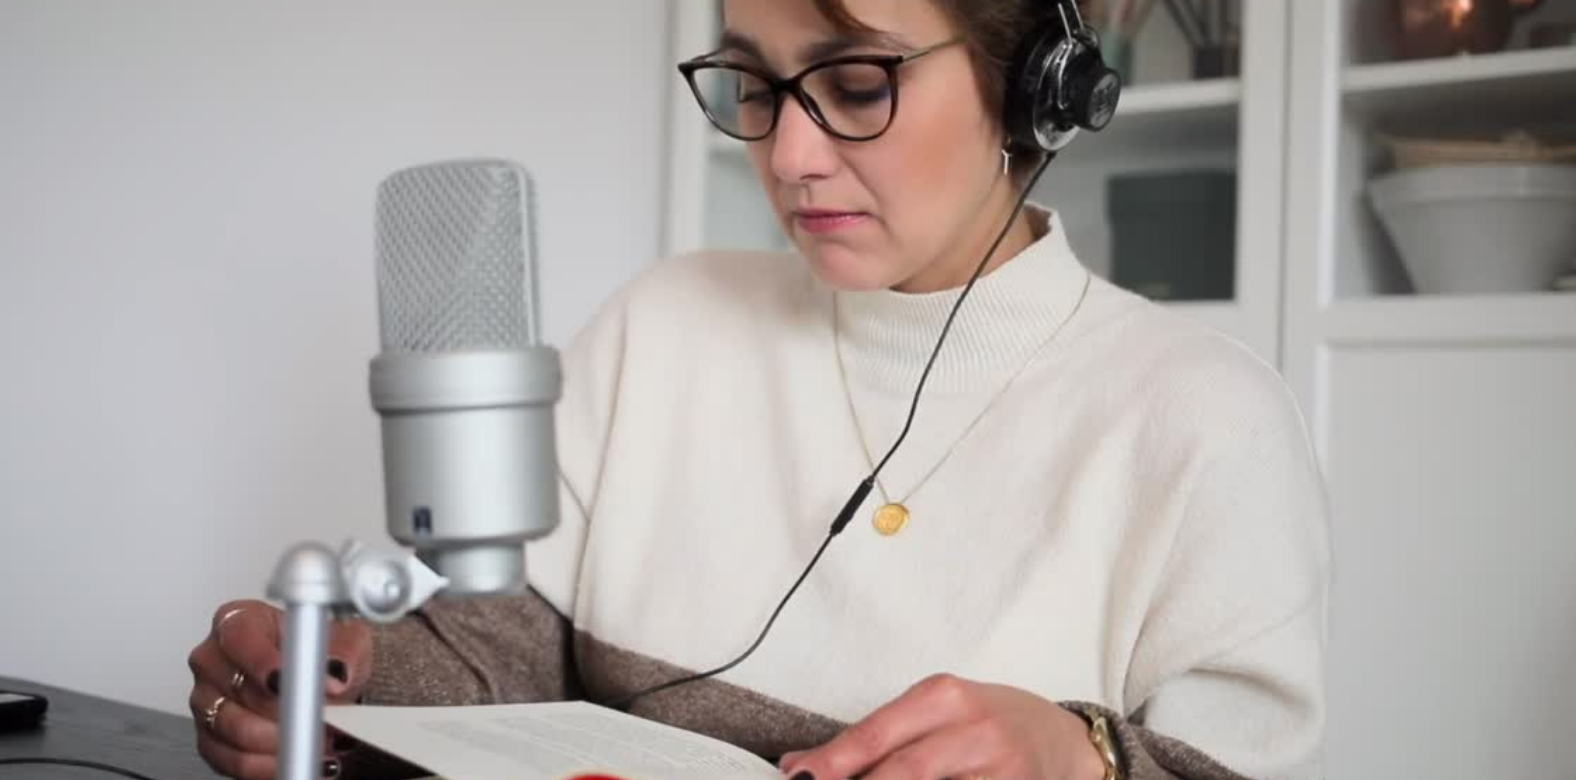  A woman reading a text with a microphone and headphones